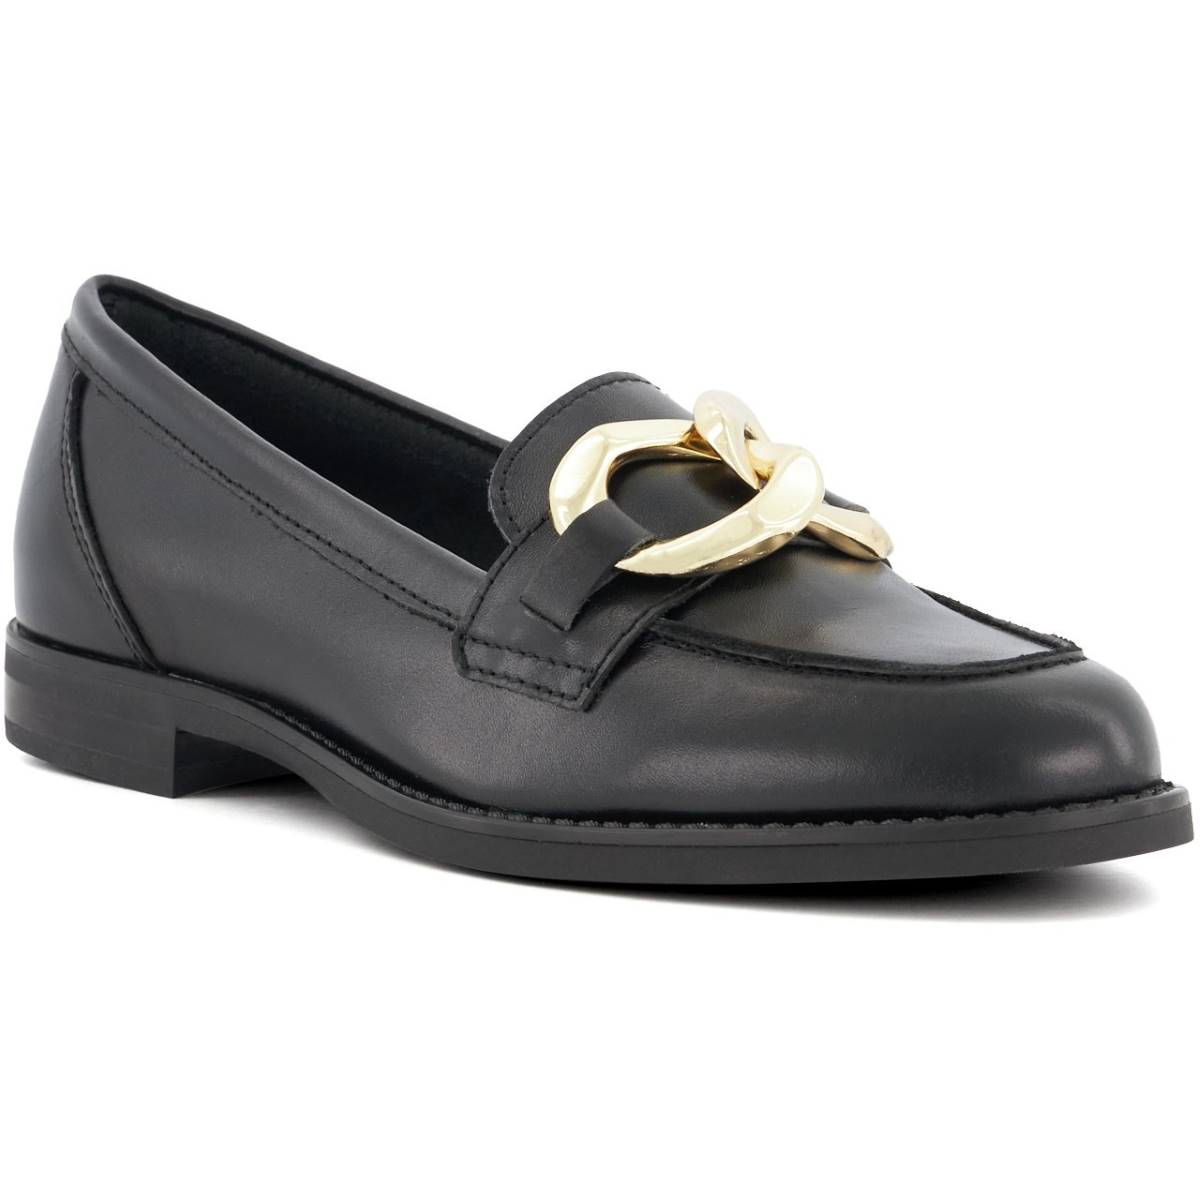 Dune London Goddess Black Womens loafers 76501000008484 in a Plain Leather in Size 7